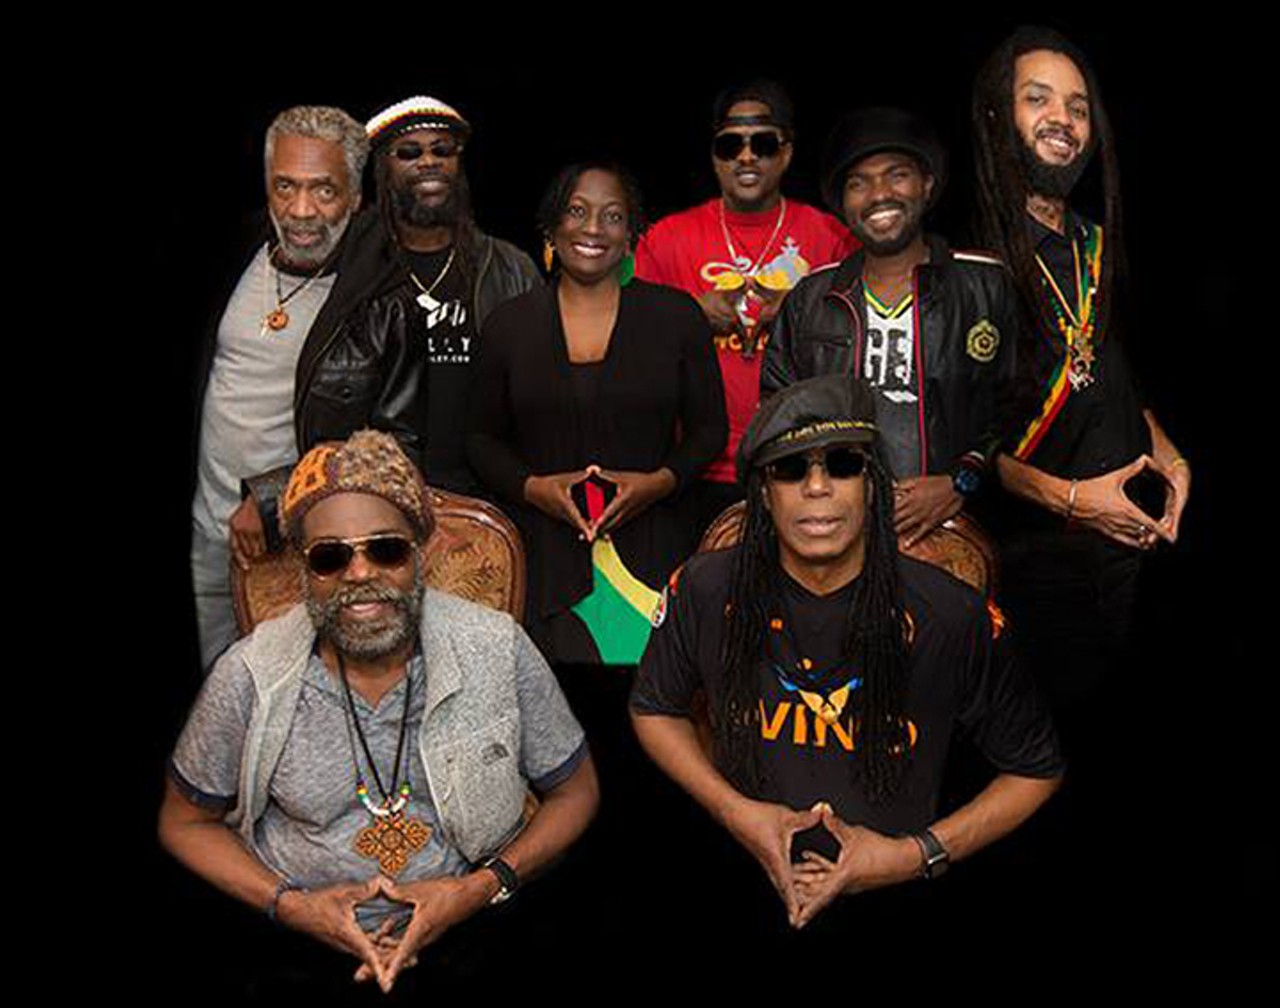 Wednesday, Jan. 3The Wailers at the Social